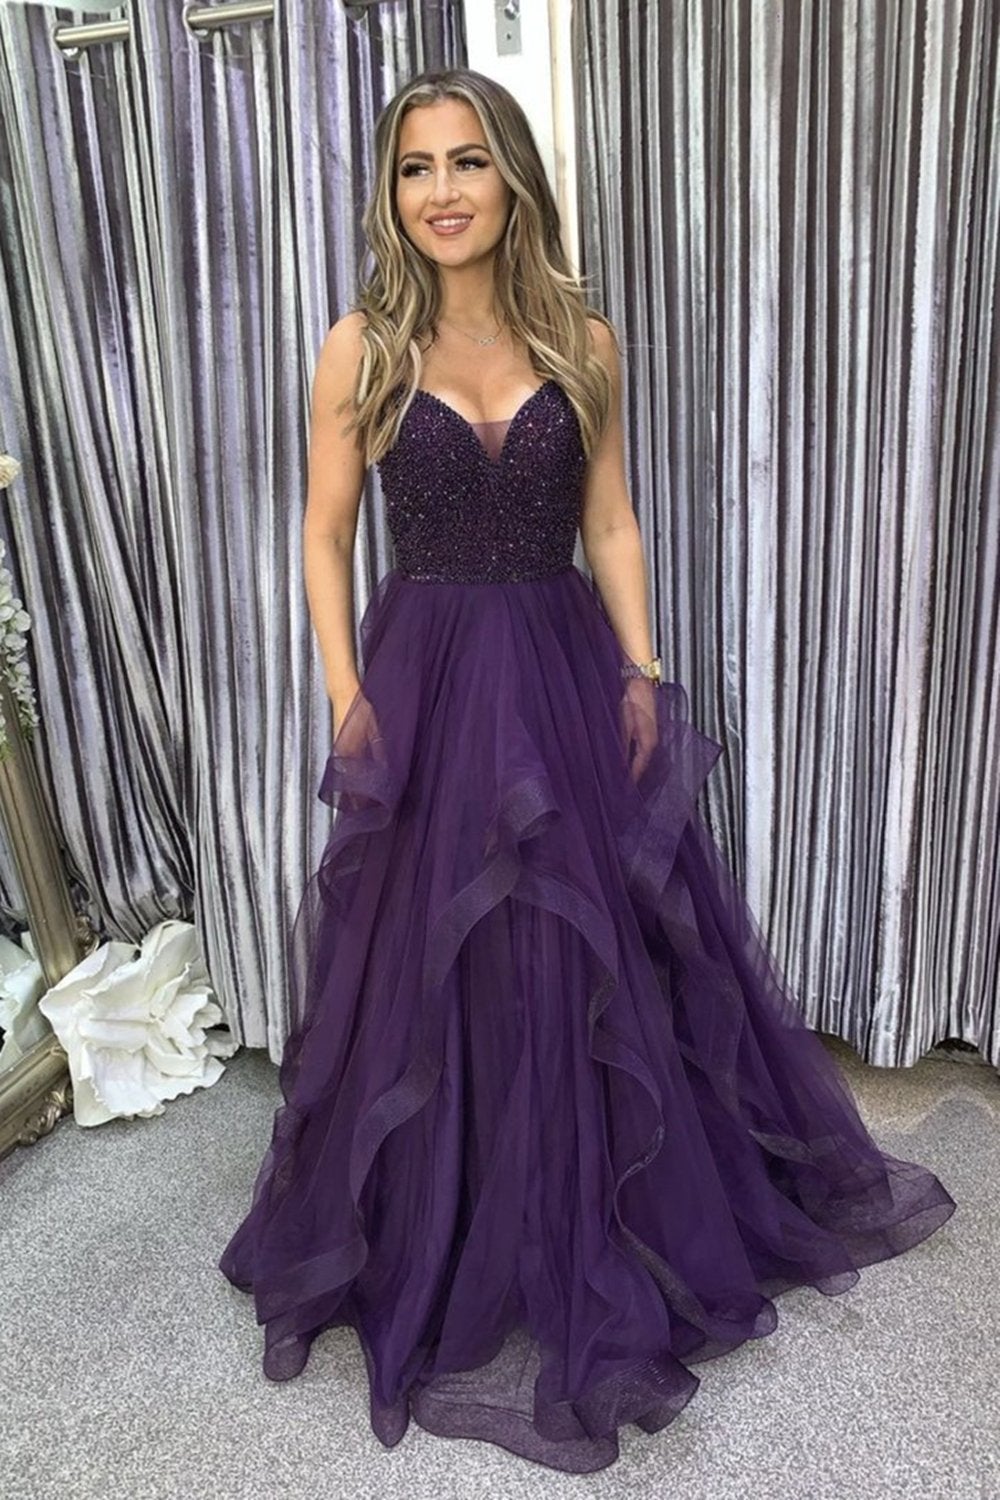 Fluffy A-line V neck Tulle Purple Formal Prom Dress with Beading,Party Dress